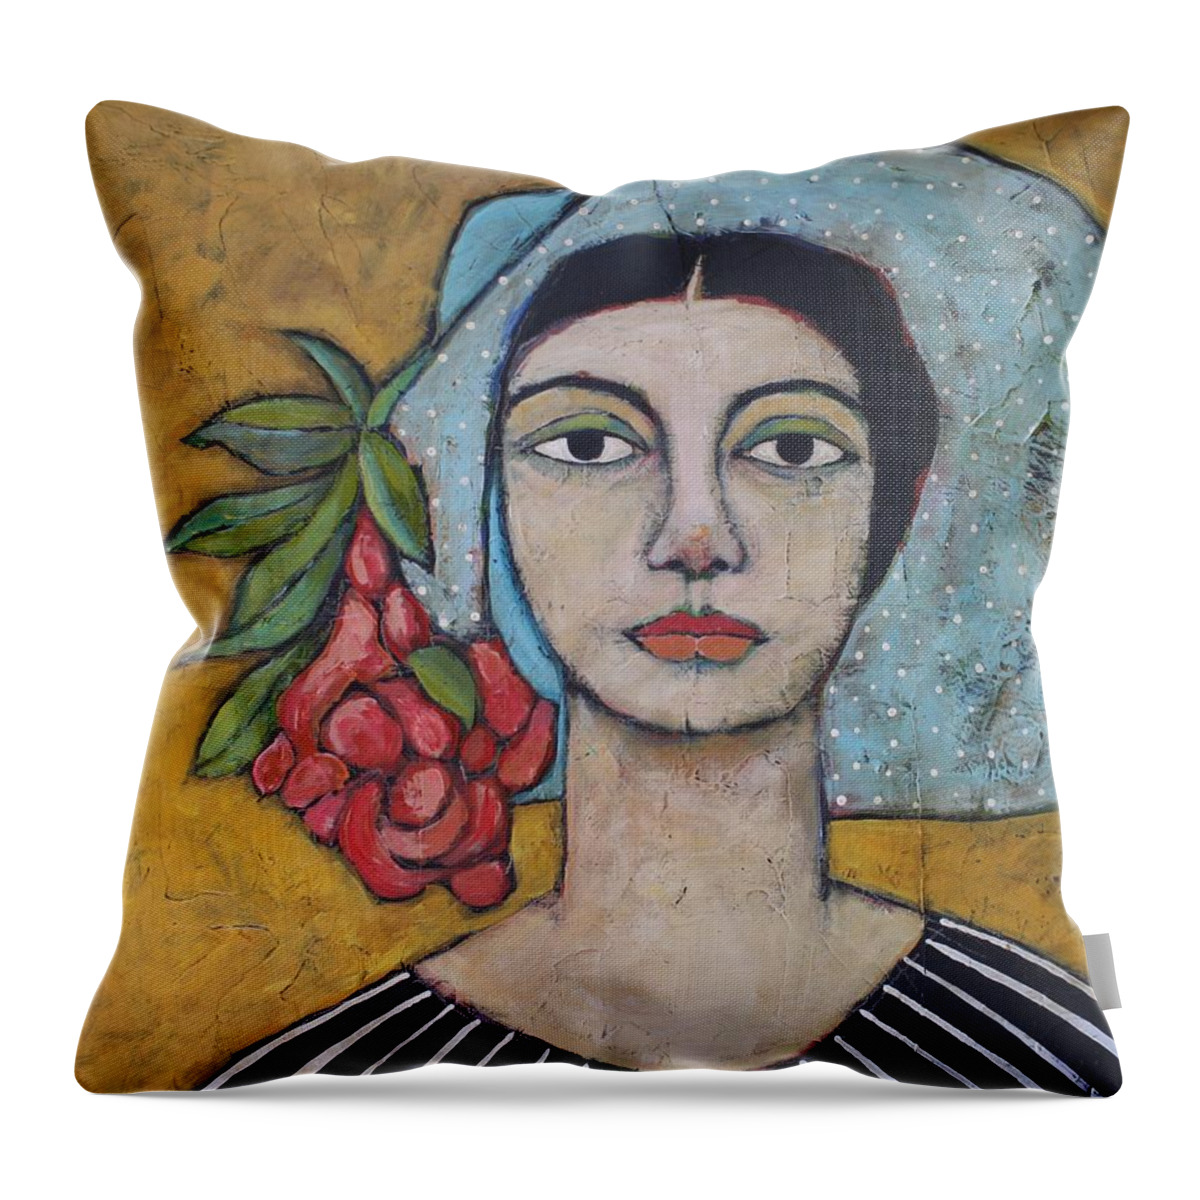 Mixed Media Throw Pillow featuring the painting Eileen by Jane Spakowsky